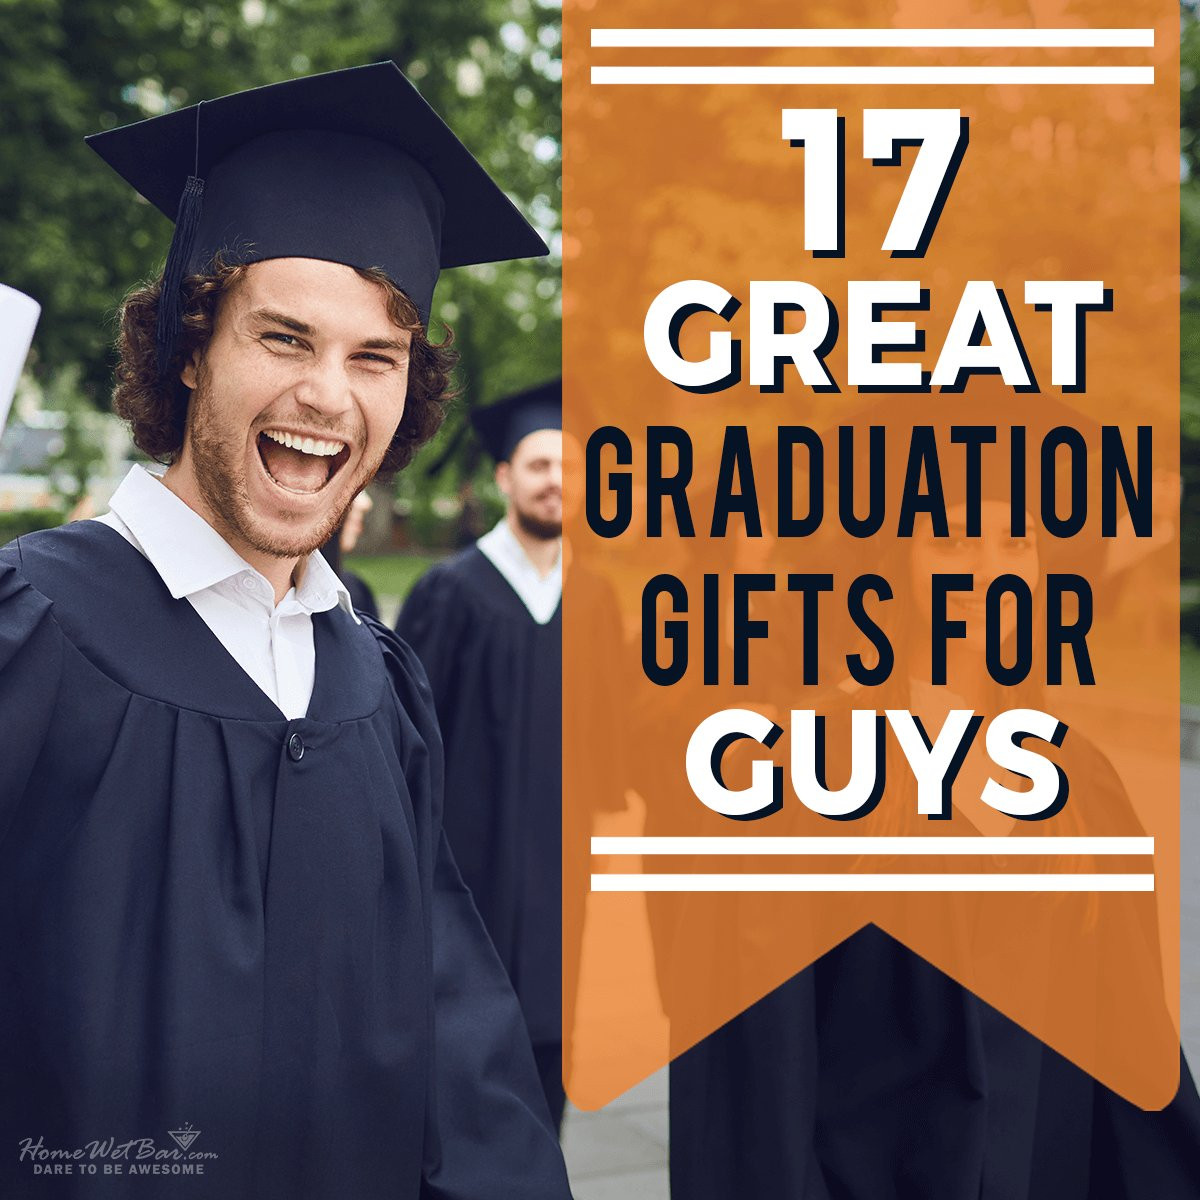 University Graduation Gift Ideas For Him
 17 Great Graduation Gifts for Guys